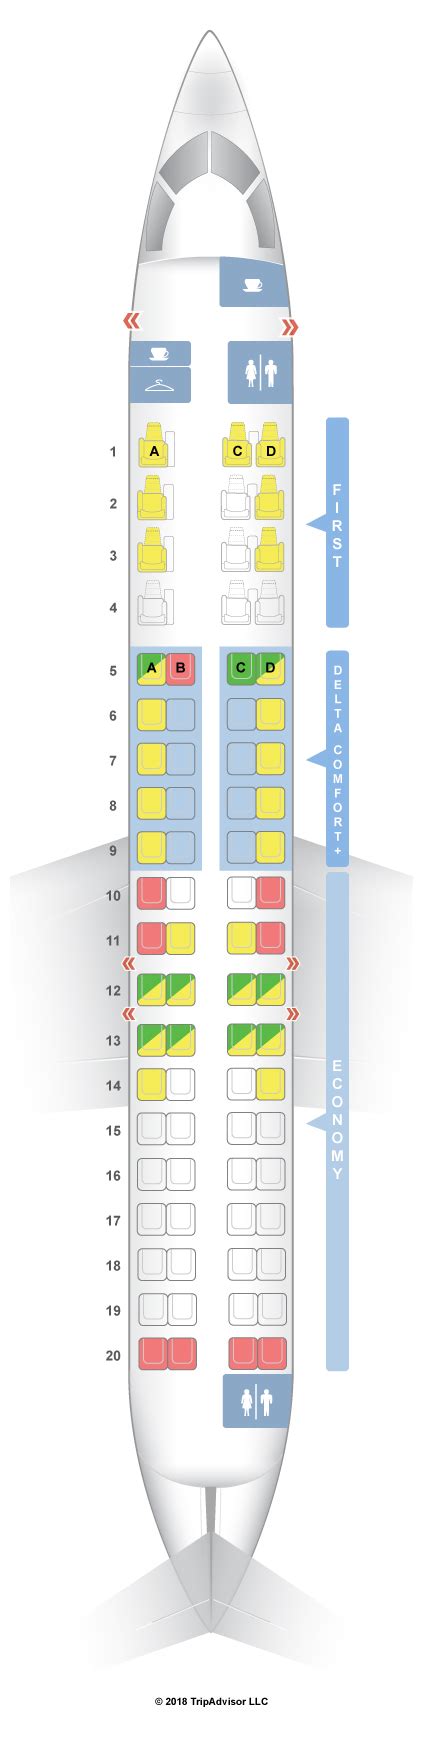 Find seat maps; Ebook NEW; Choose the best seat; Travel tips; Travel products; My account; Seat Map American Airlines CRJ 900 V2. Seatmap key. Show legend; Download PDF; Email seating map; Find the seat map you will be flying in; Seating details. Class Pitch Width Seats; First Class: 38" 19.7" 9: Main Cabin Extra: 34", exit row: 16.55-17.33" 23-32: